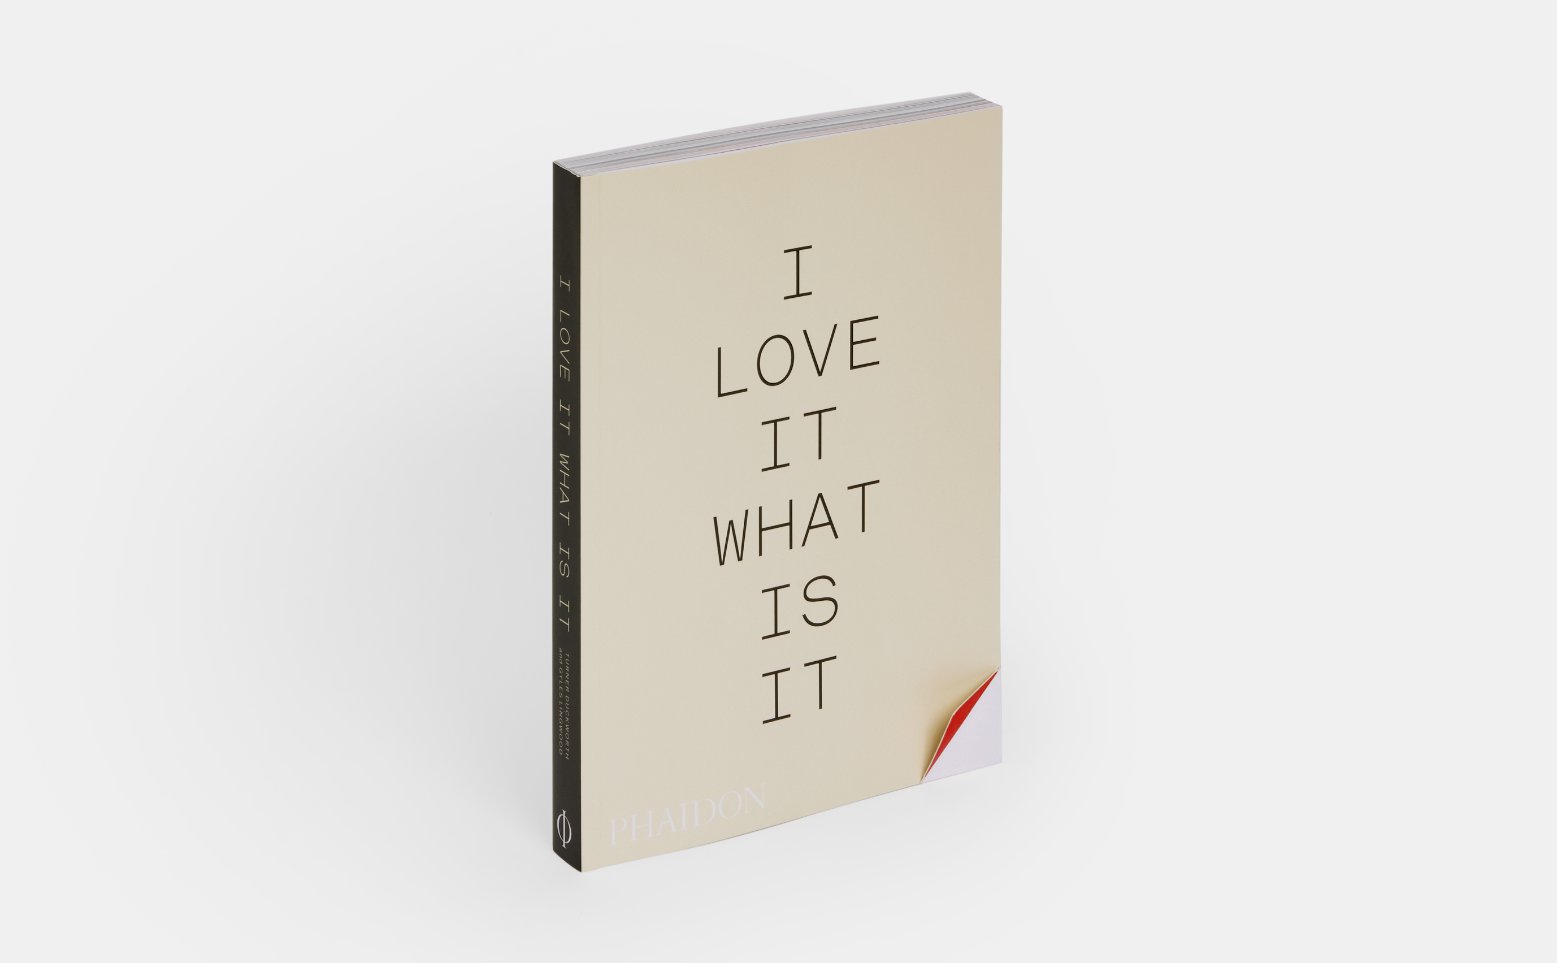 Turner Duckworth’s Book ‘I Love It. What Is It?’ is a Design and Branding Anthology from Creatives Around the Globe